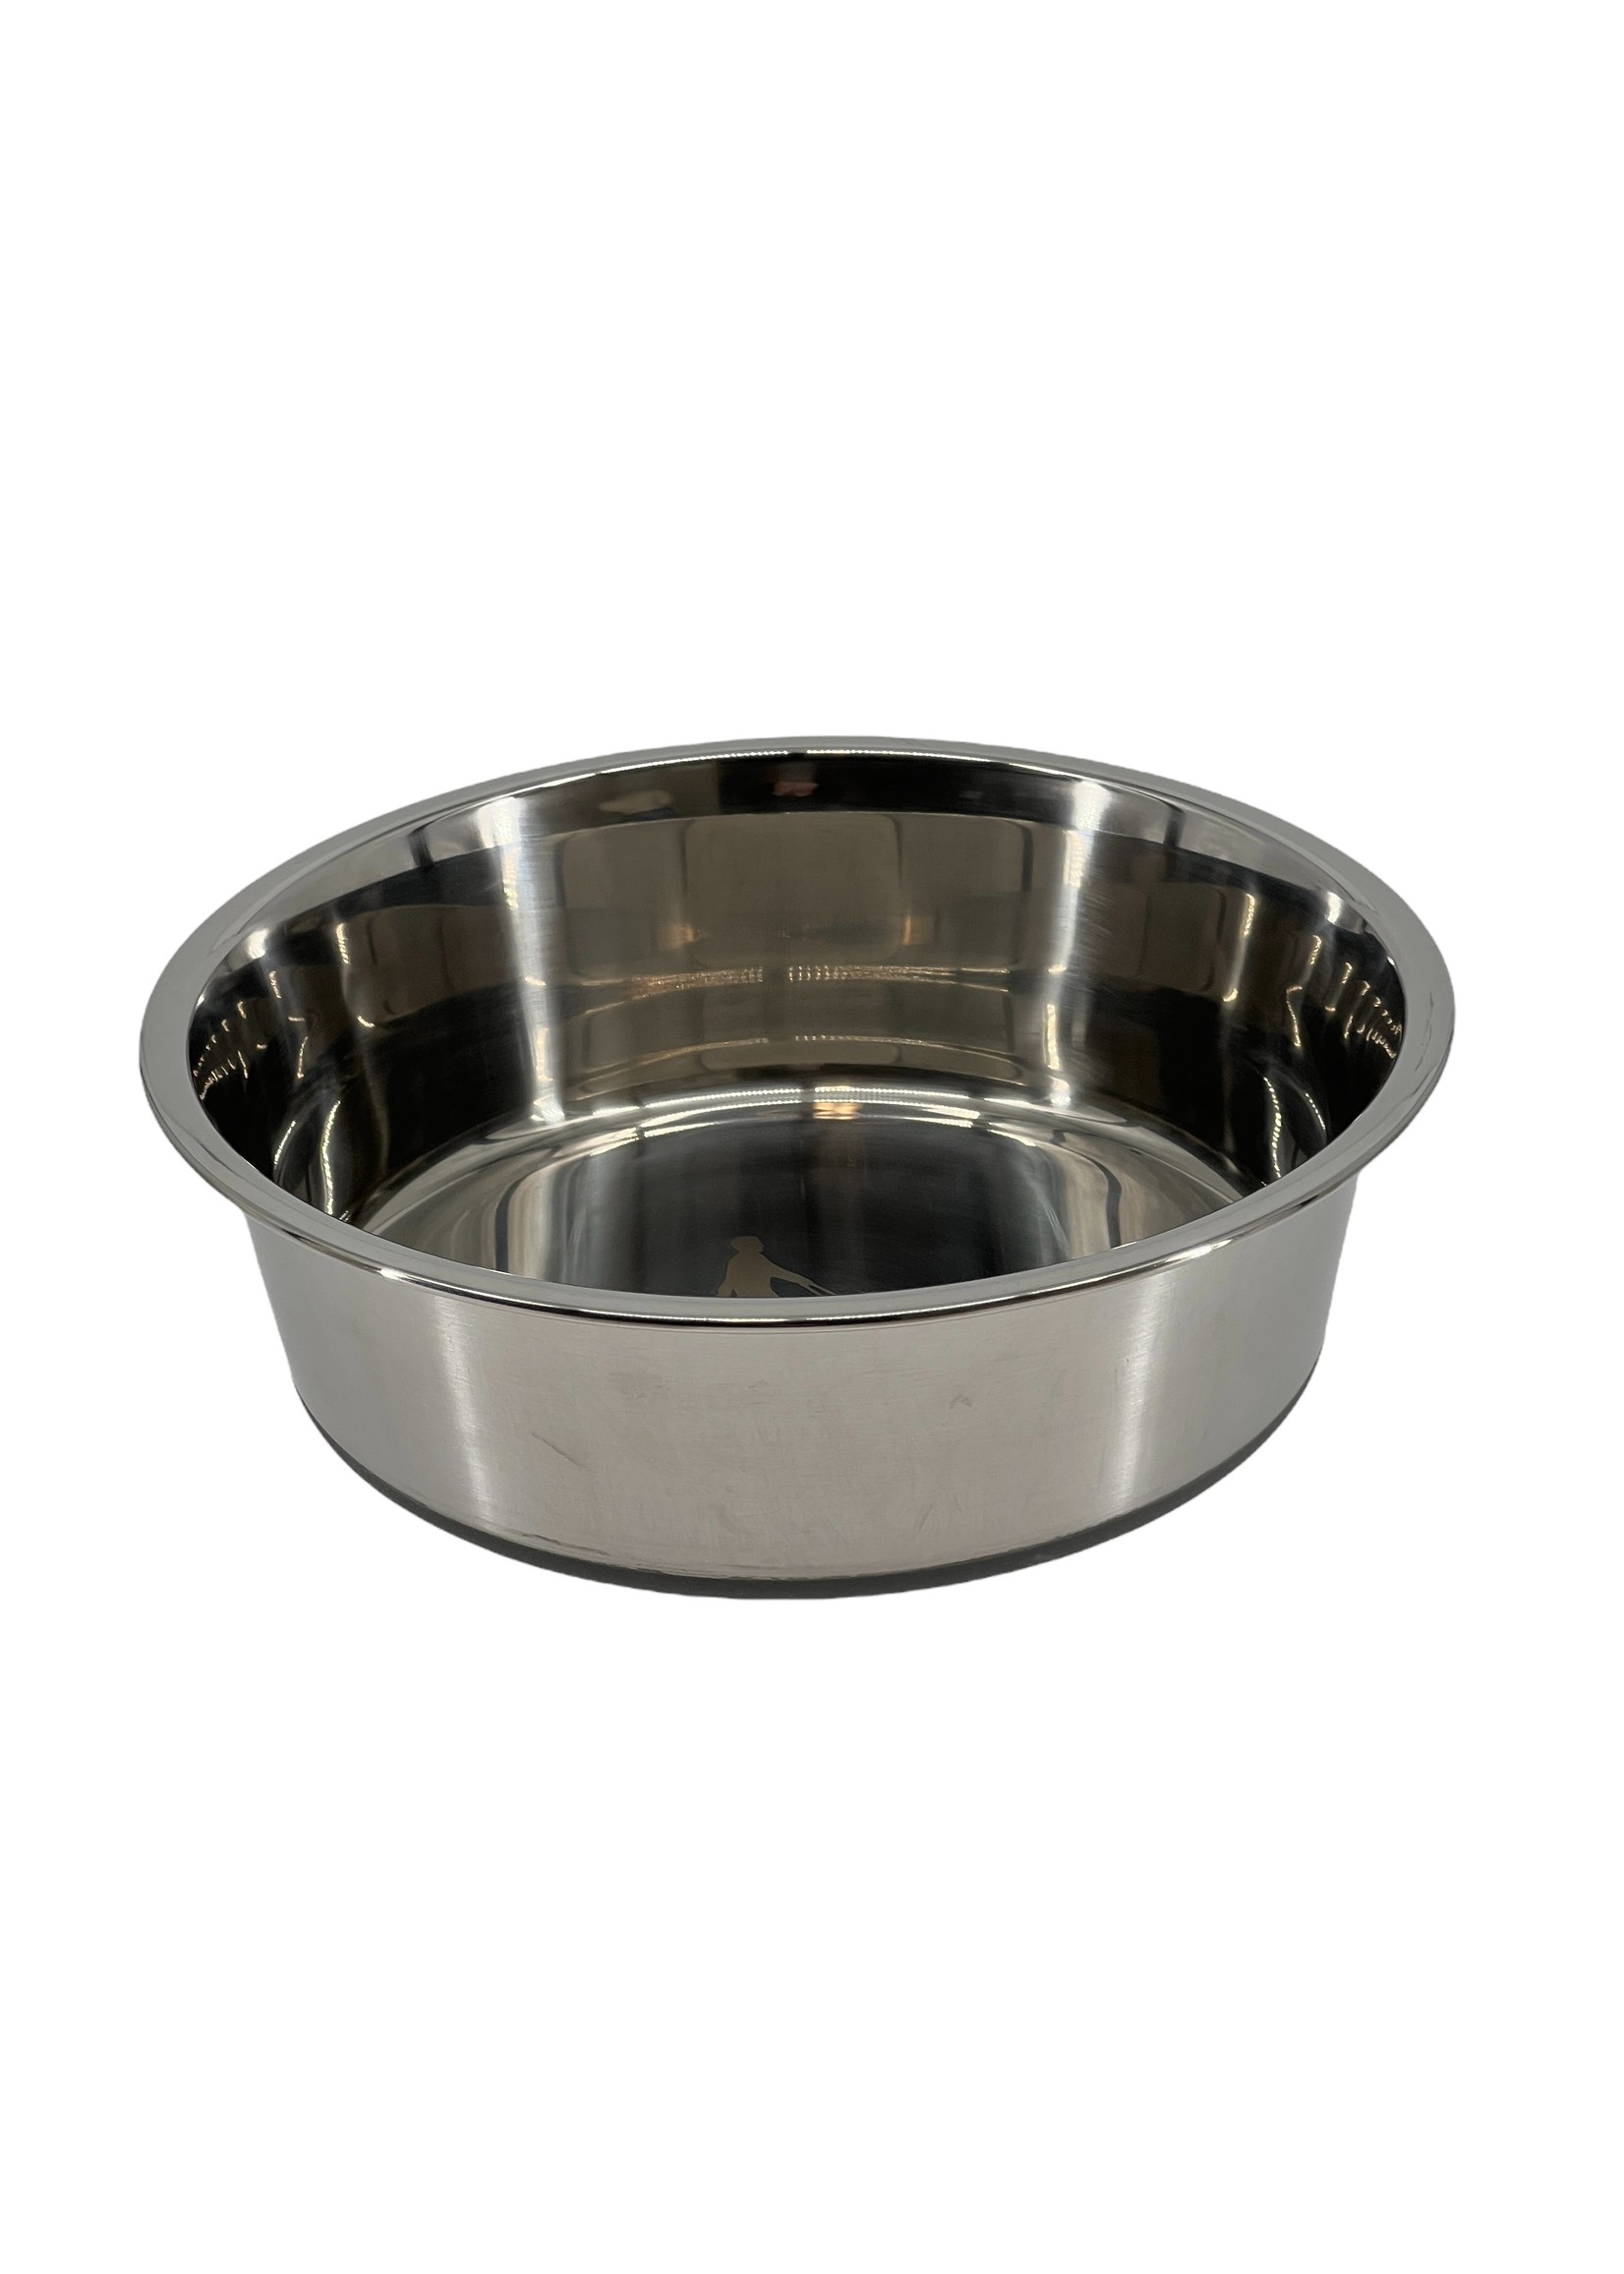 Dog Bowl with rubber grip bottom